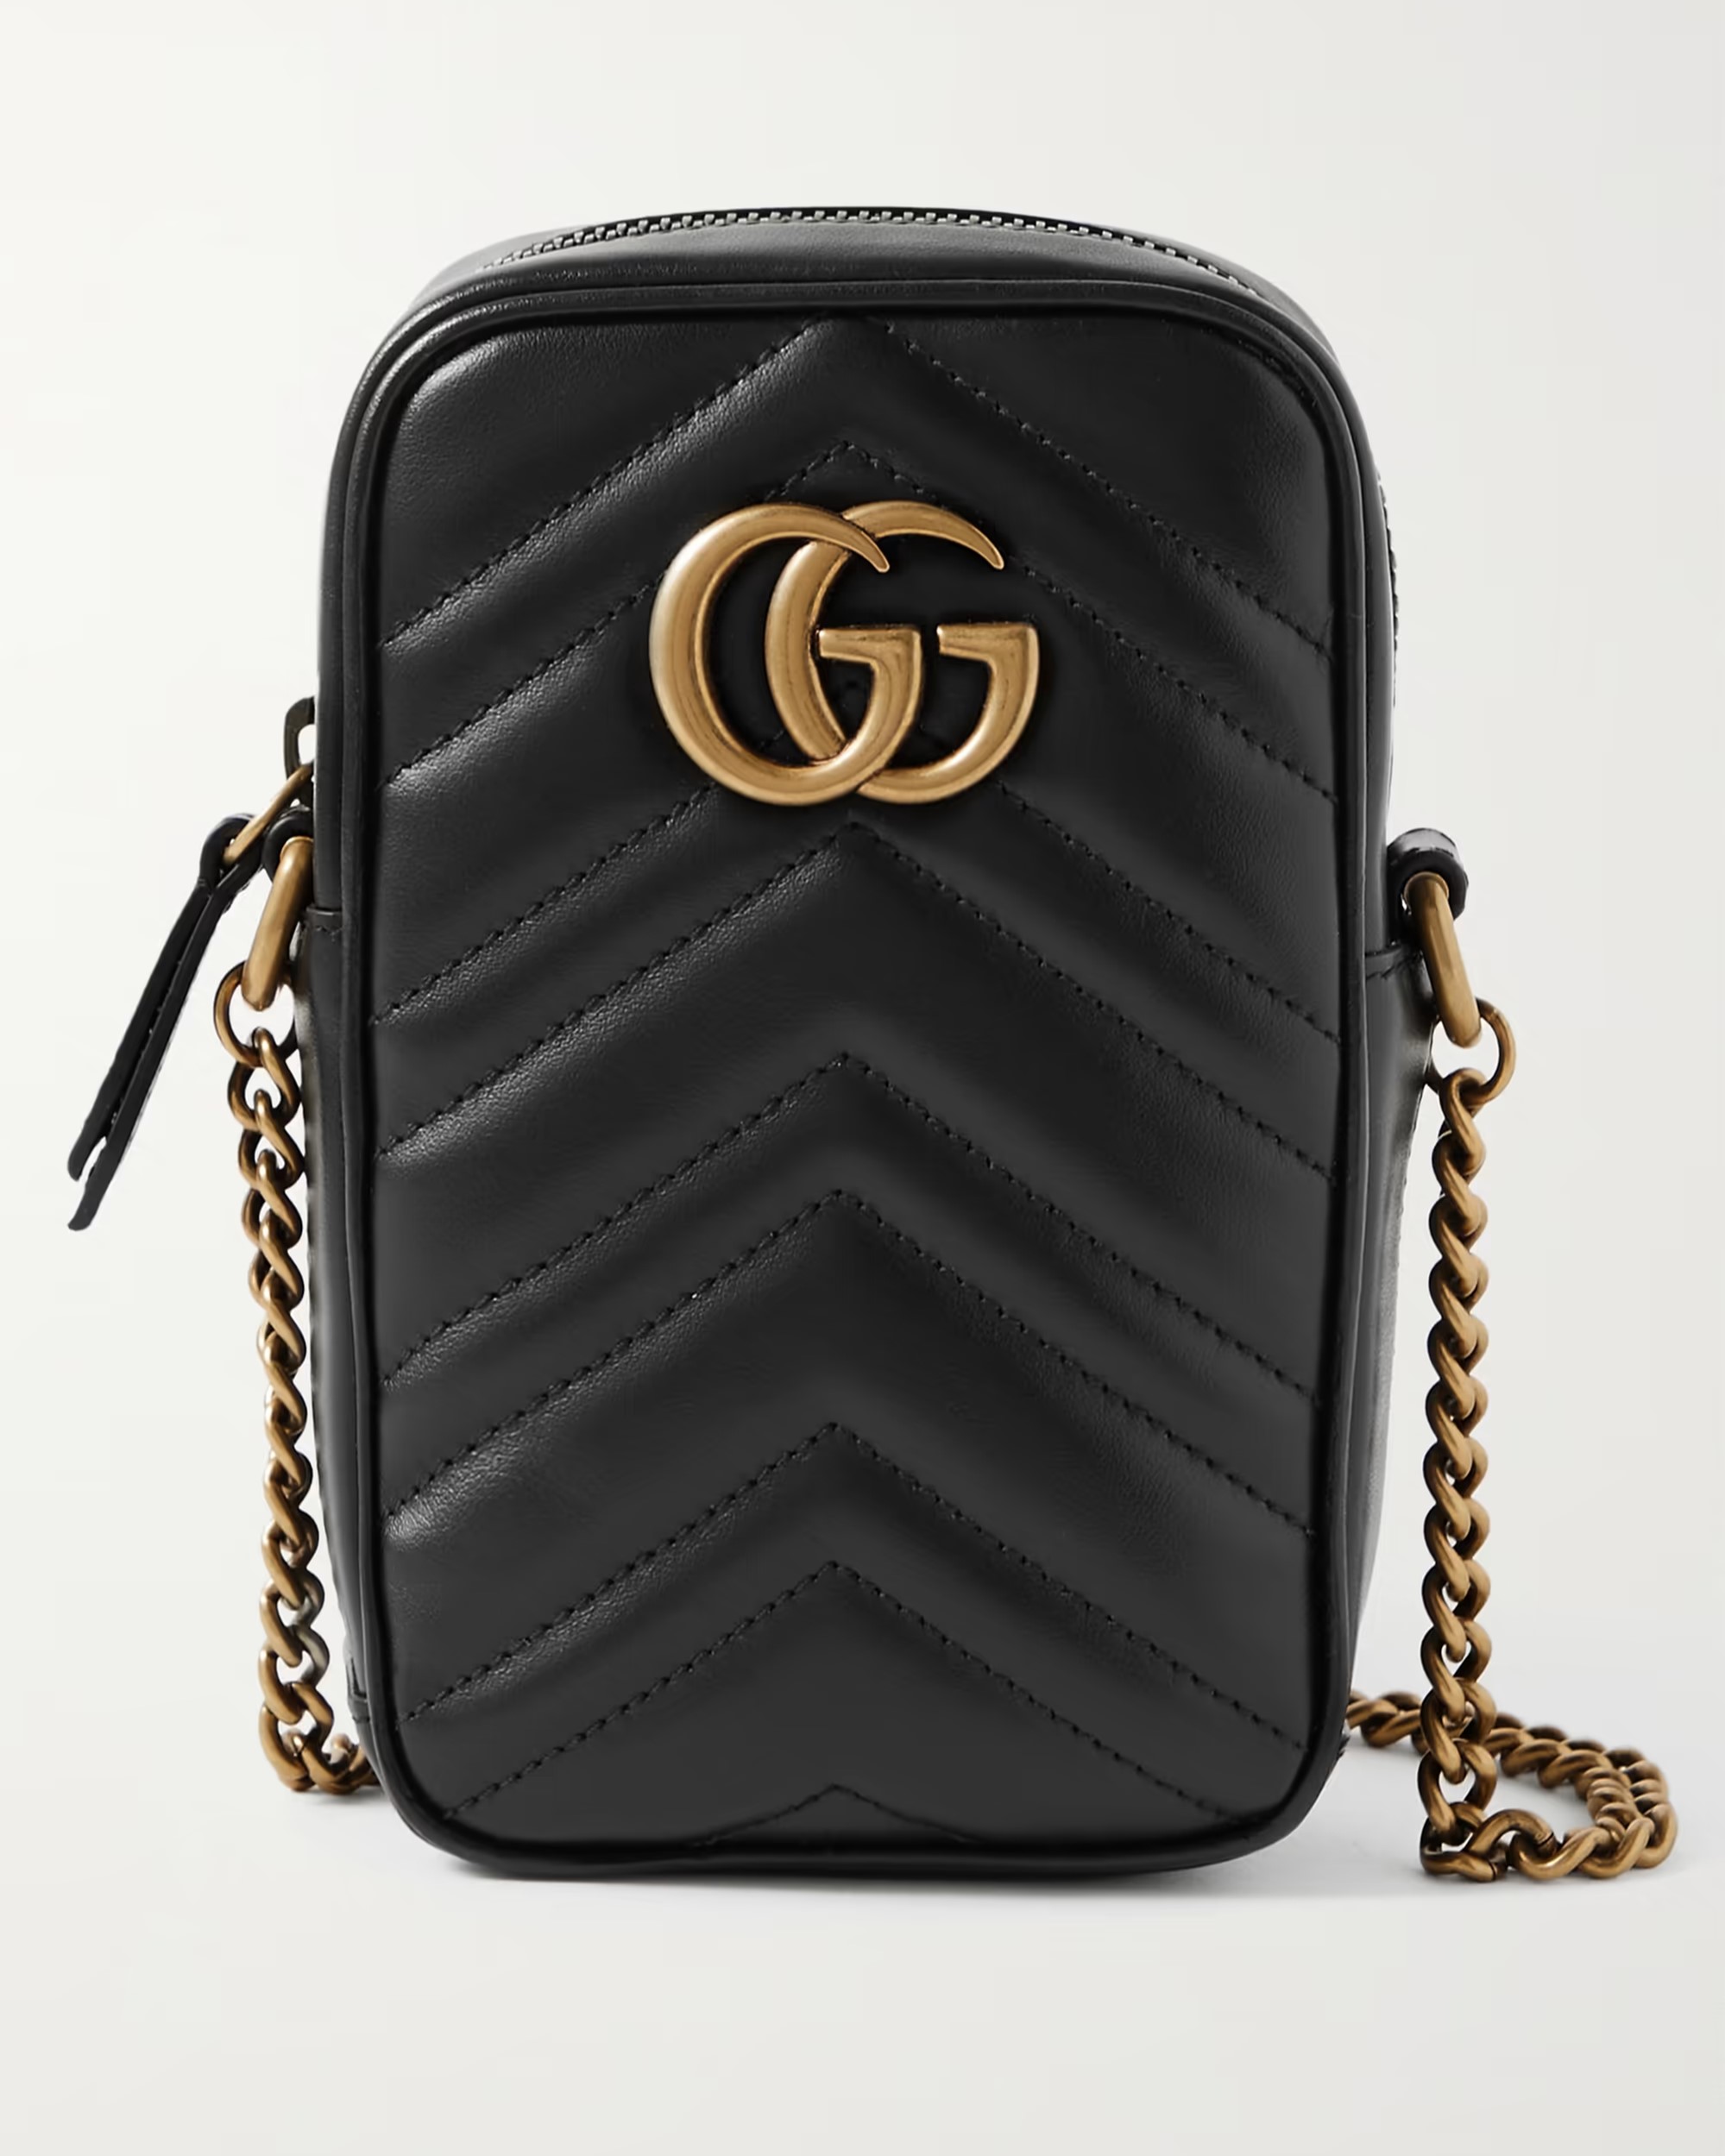 TÚI NỮ ĐEO ĐIỆN THOẠI GUCCI GG MARMONT MINI BLACK QUILTED LEATHER POUCH 1